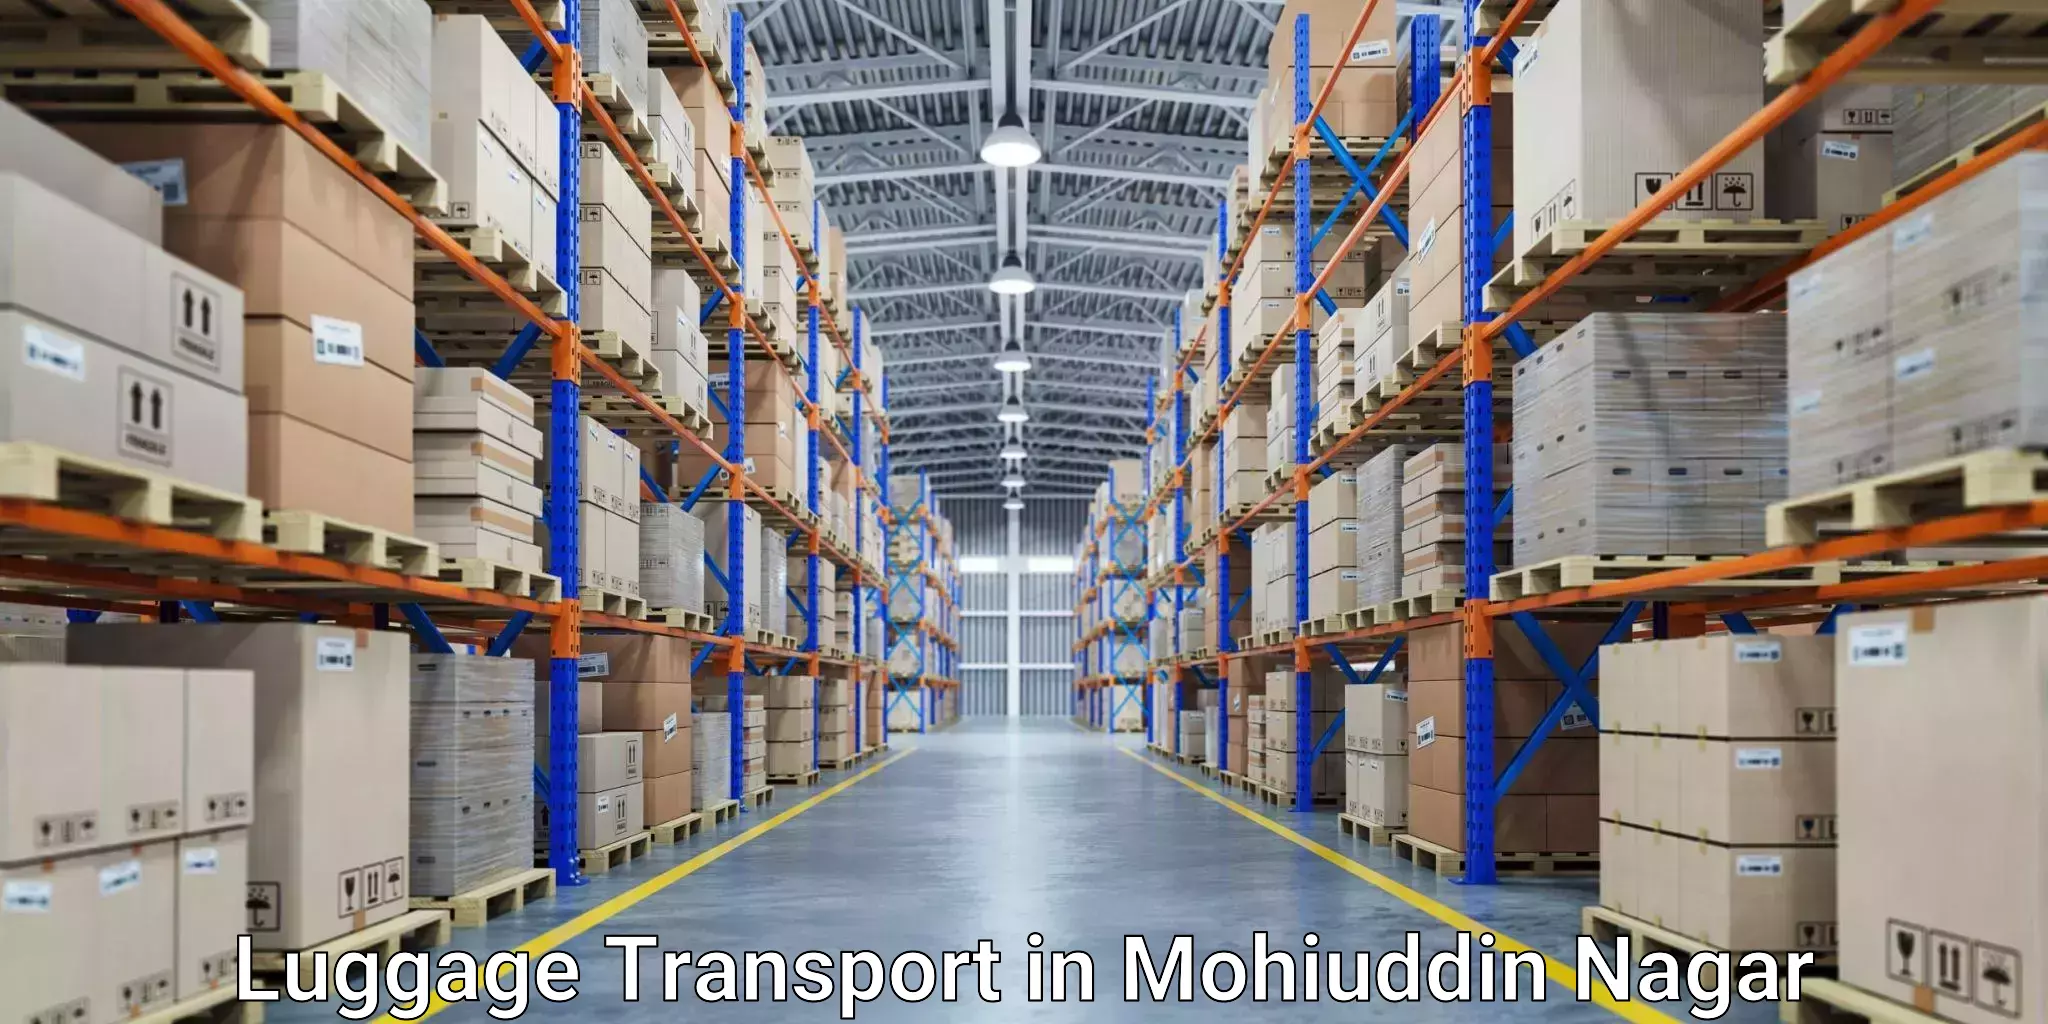 Baggage transport services in Mohiuddin Nagar